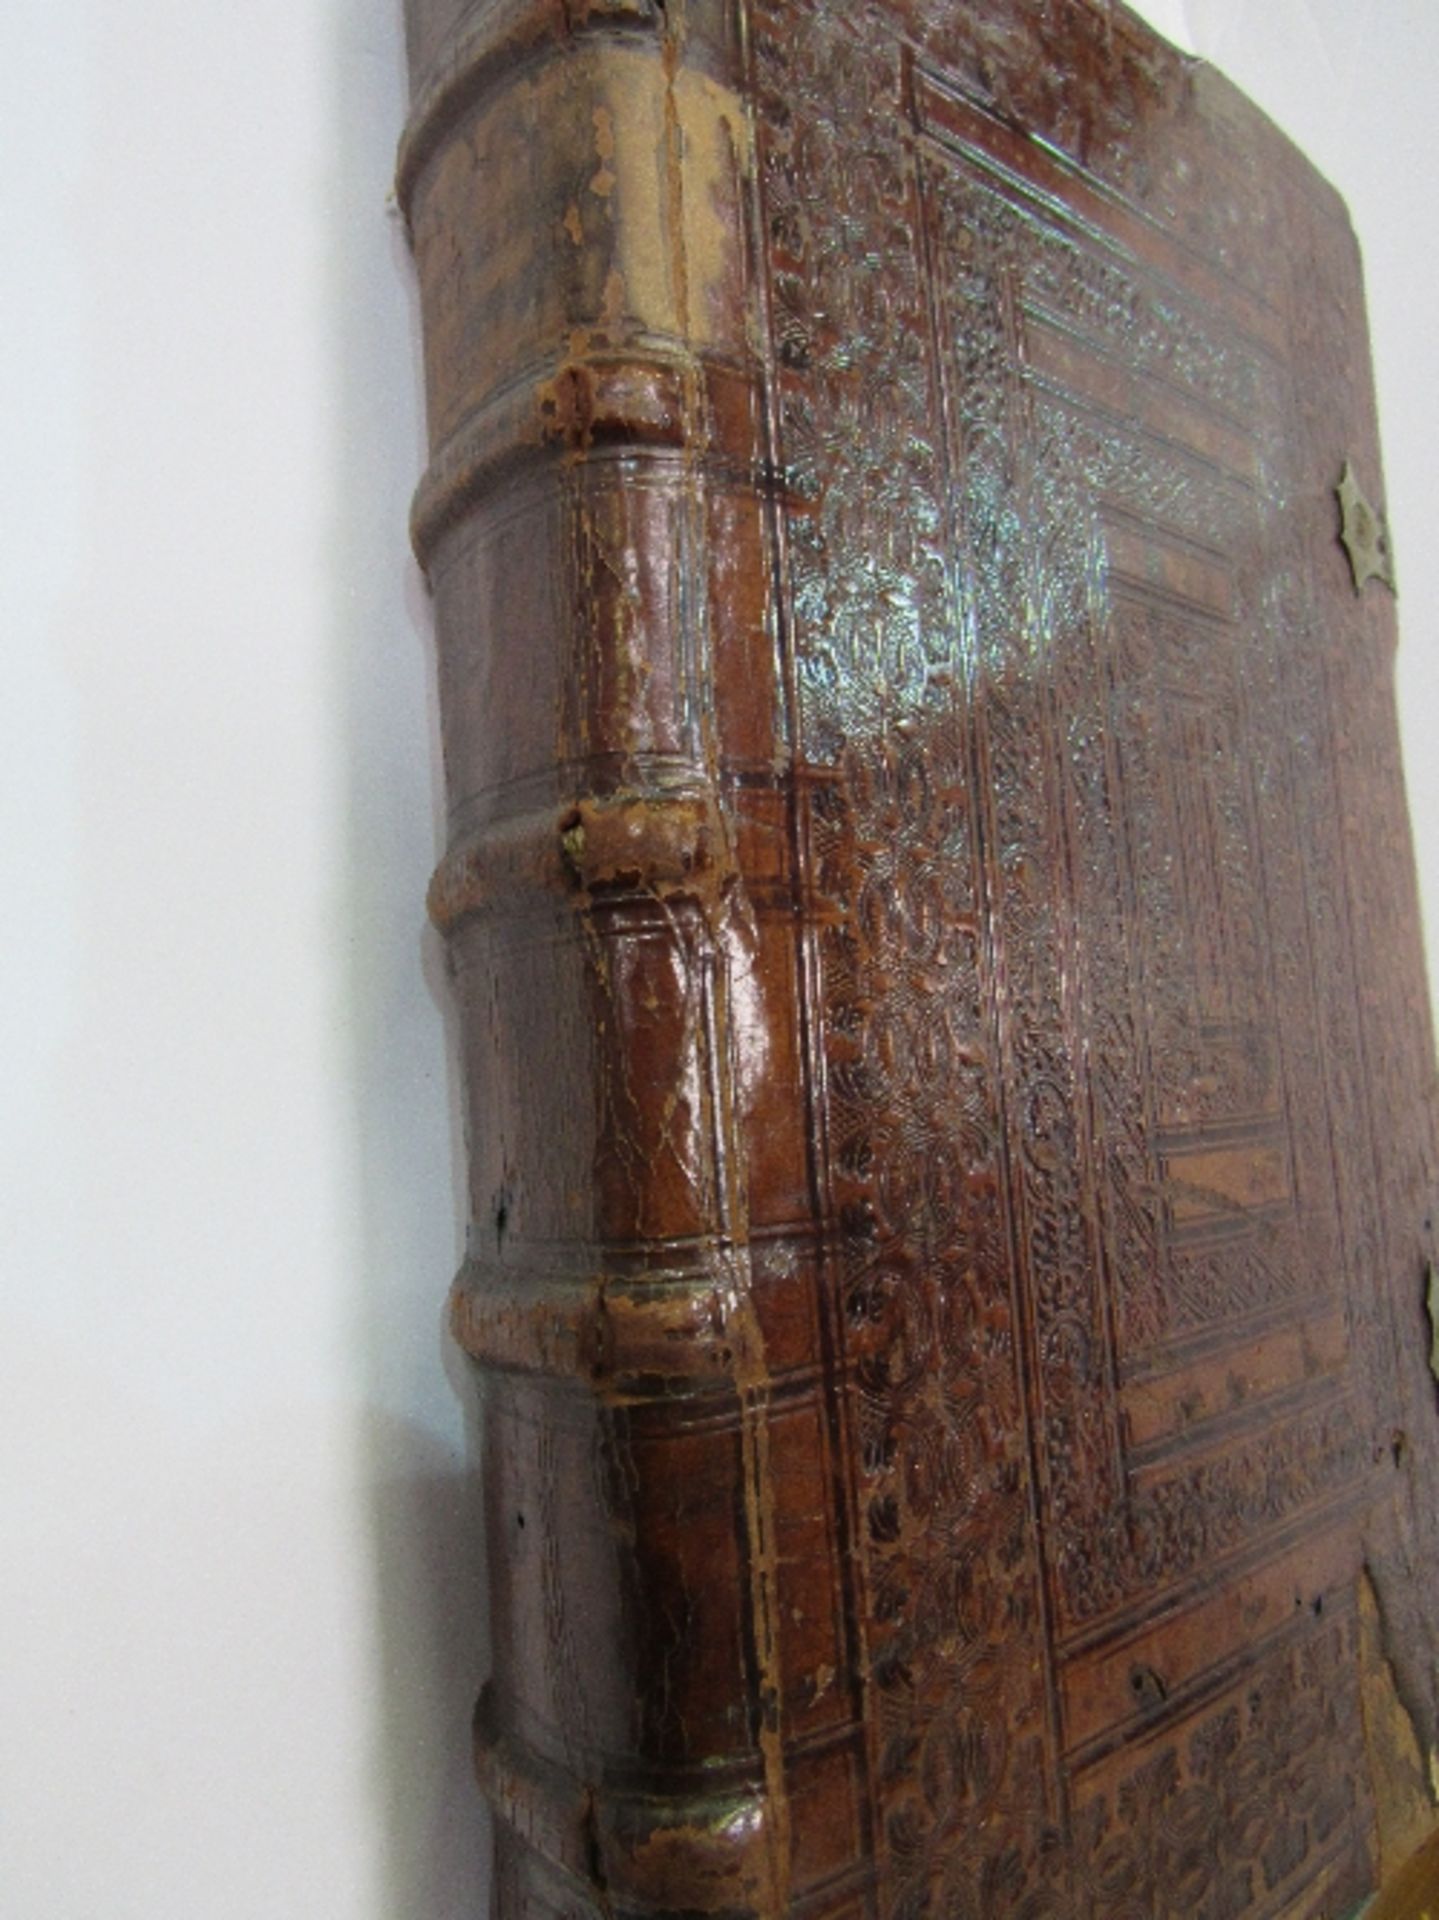 Fine early 17th century bindings the letter of Saint Paul, edited by William Este. Text in Latin, - Image 2 of 3